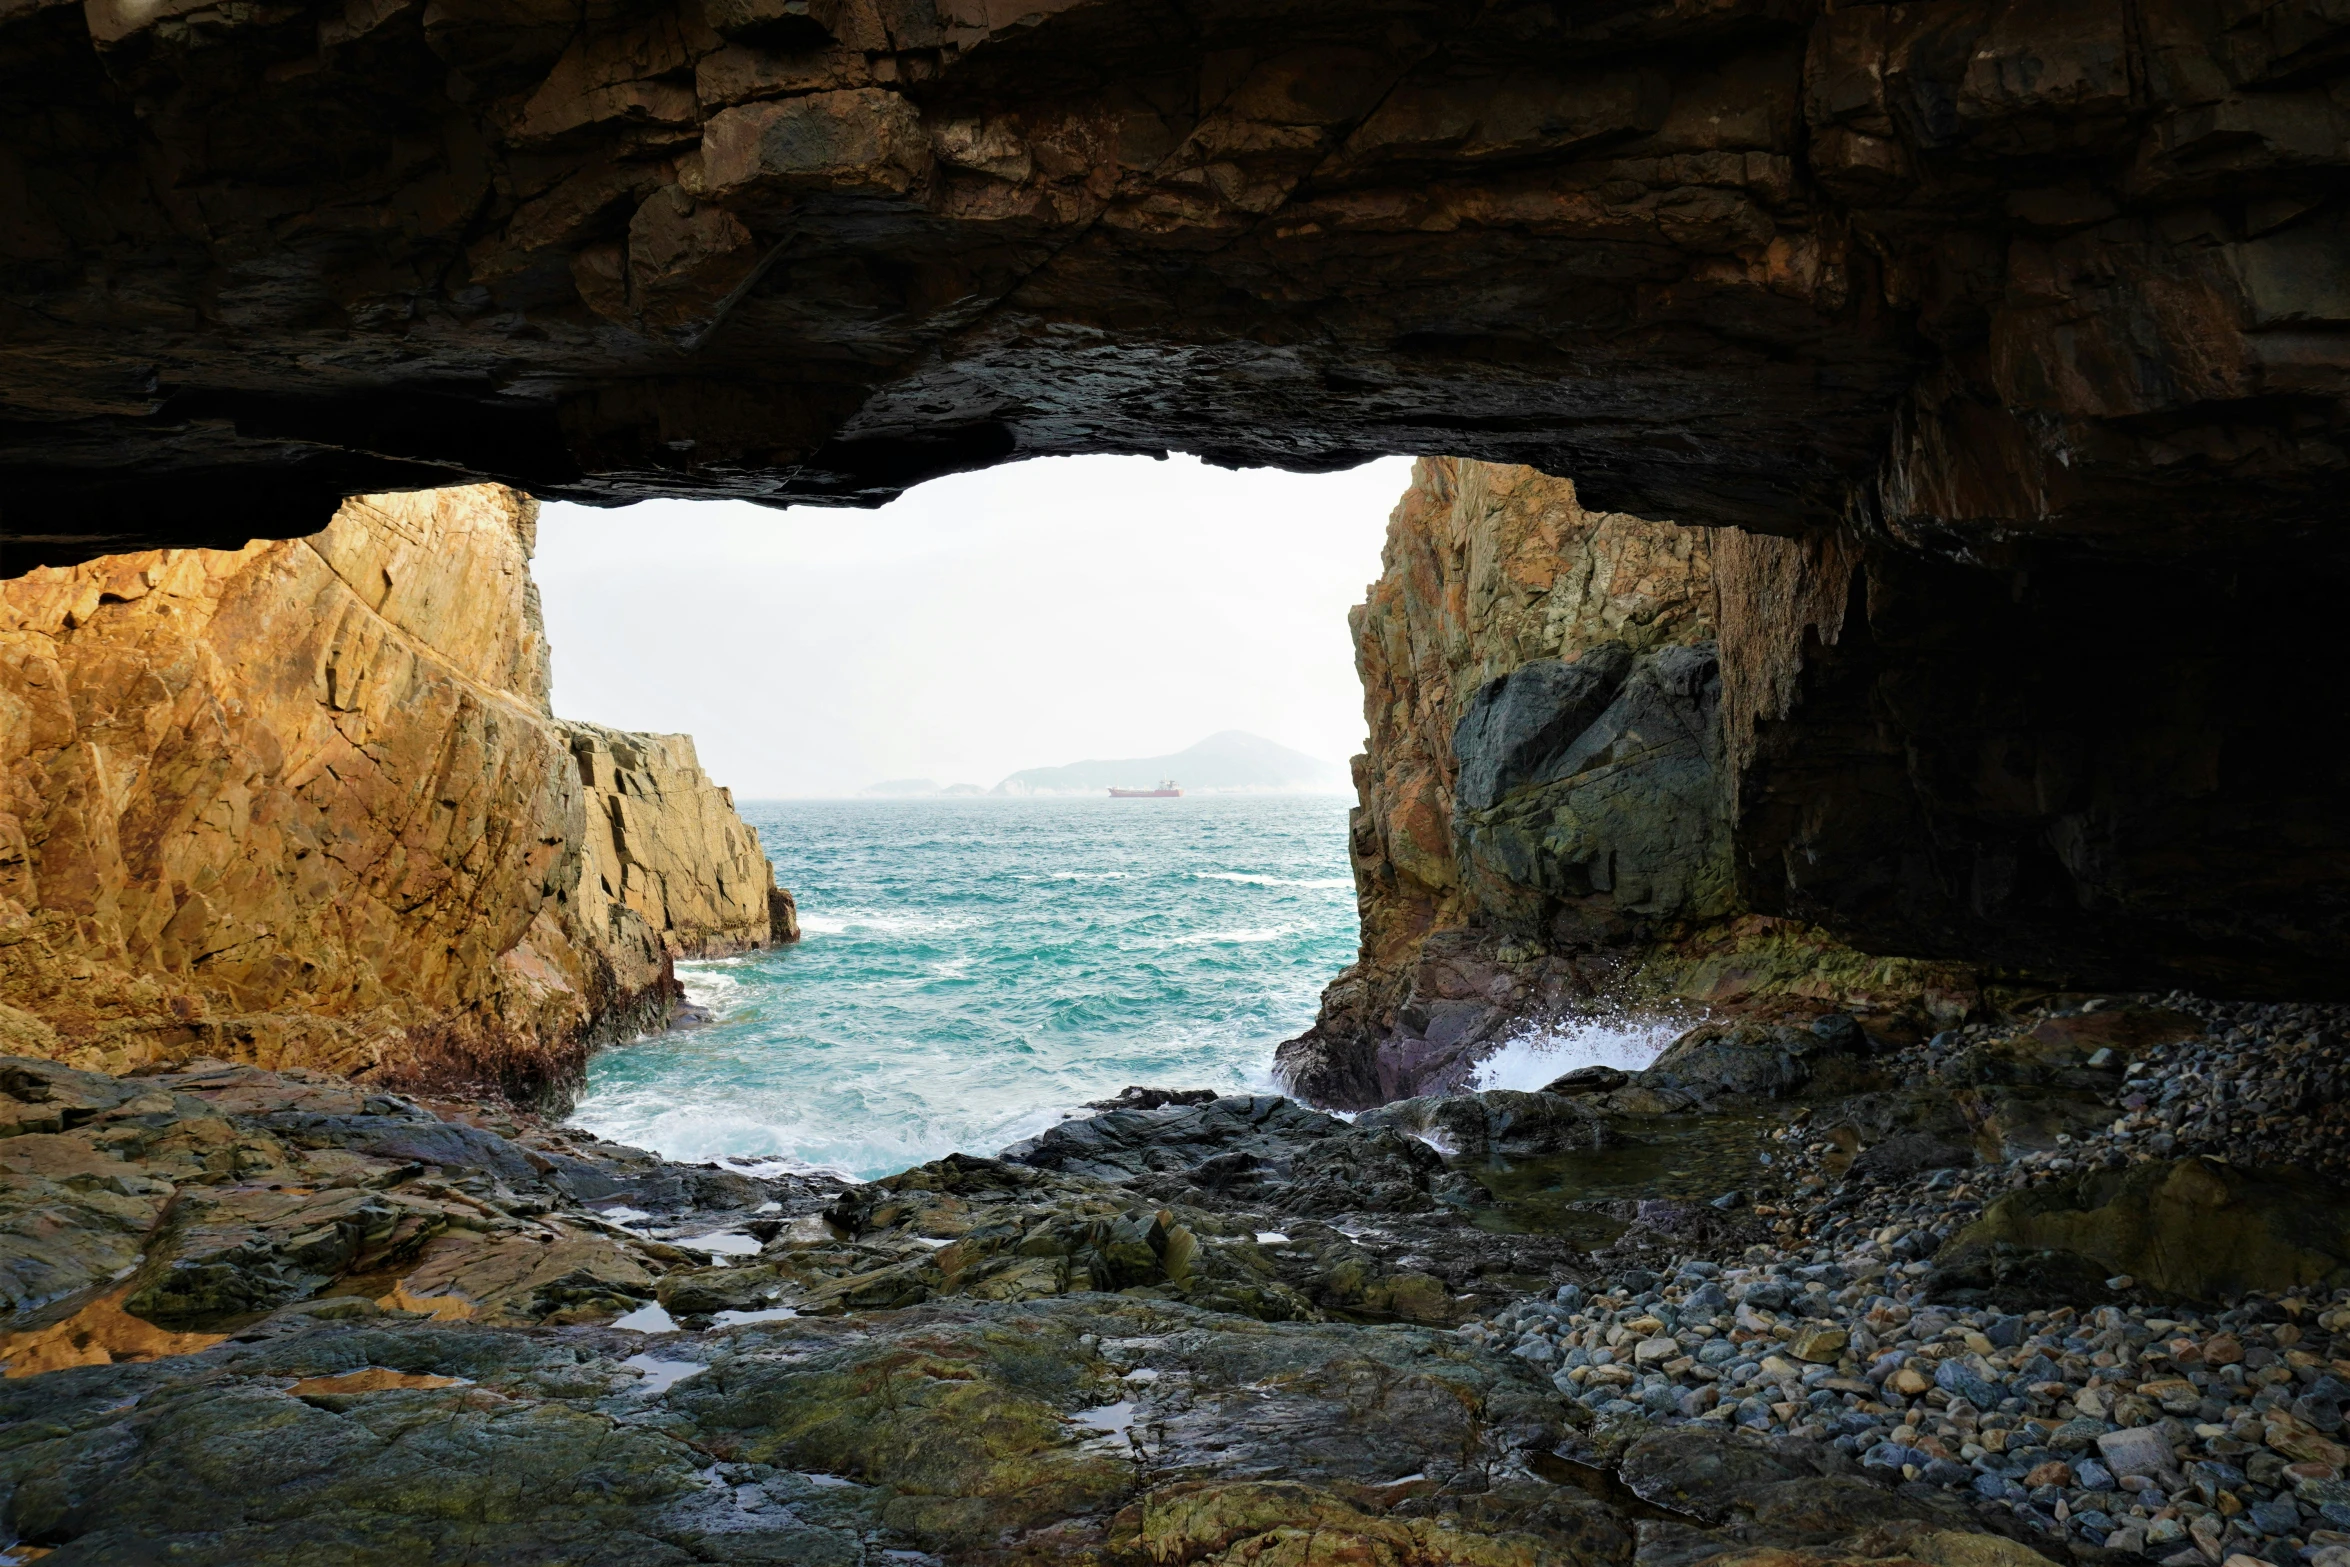 a cave with large rocks and an open doorway overlooking the ocean